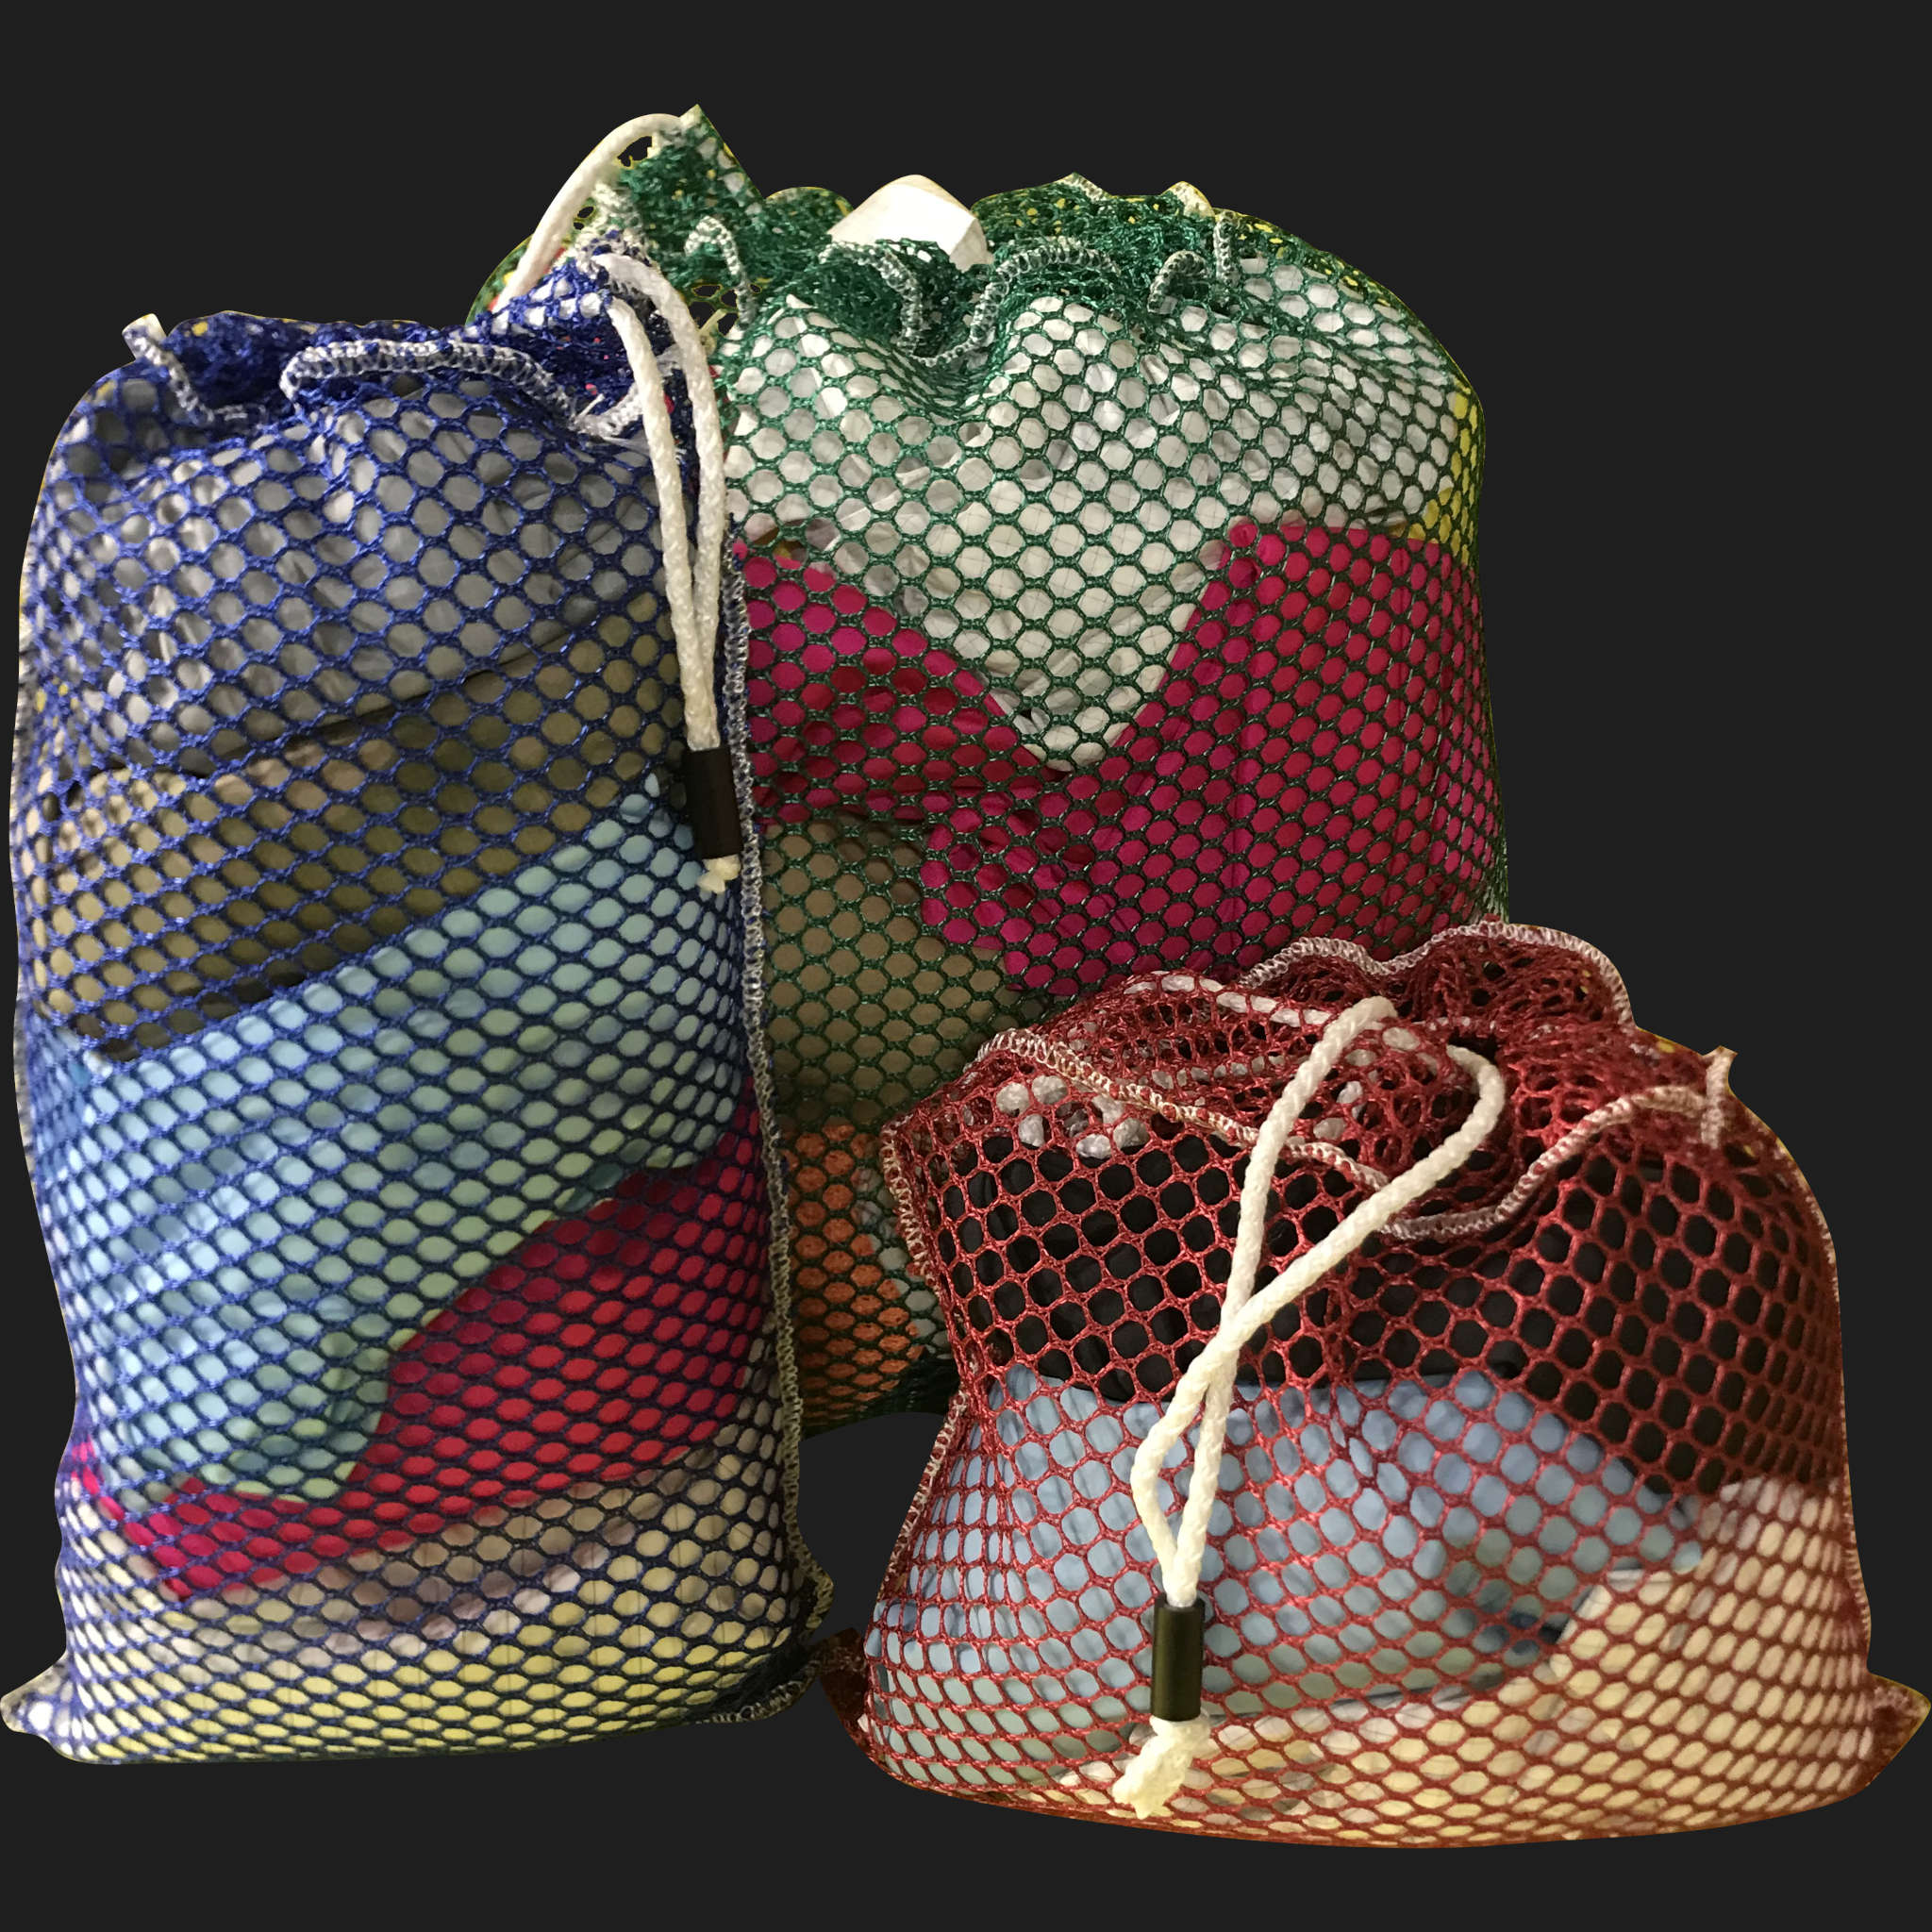 48" x 60" Customized Mesh-Net-Laundry Bags Heavy Duty with Cord and barrellock closure